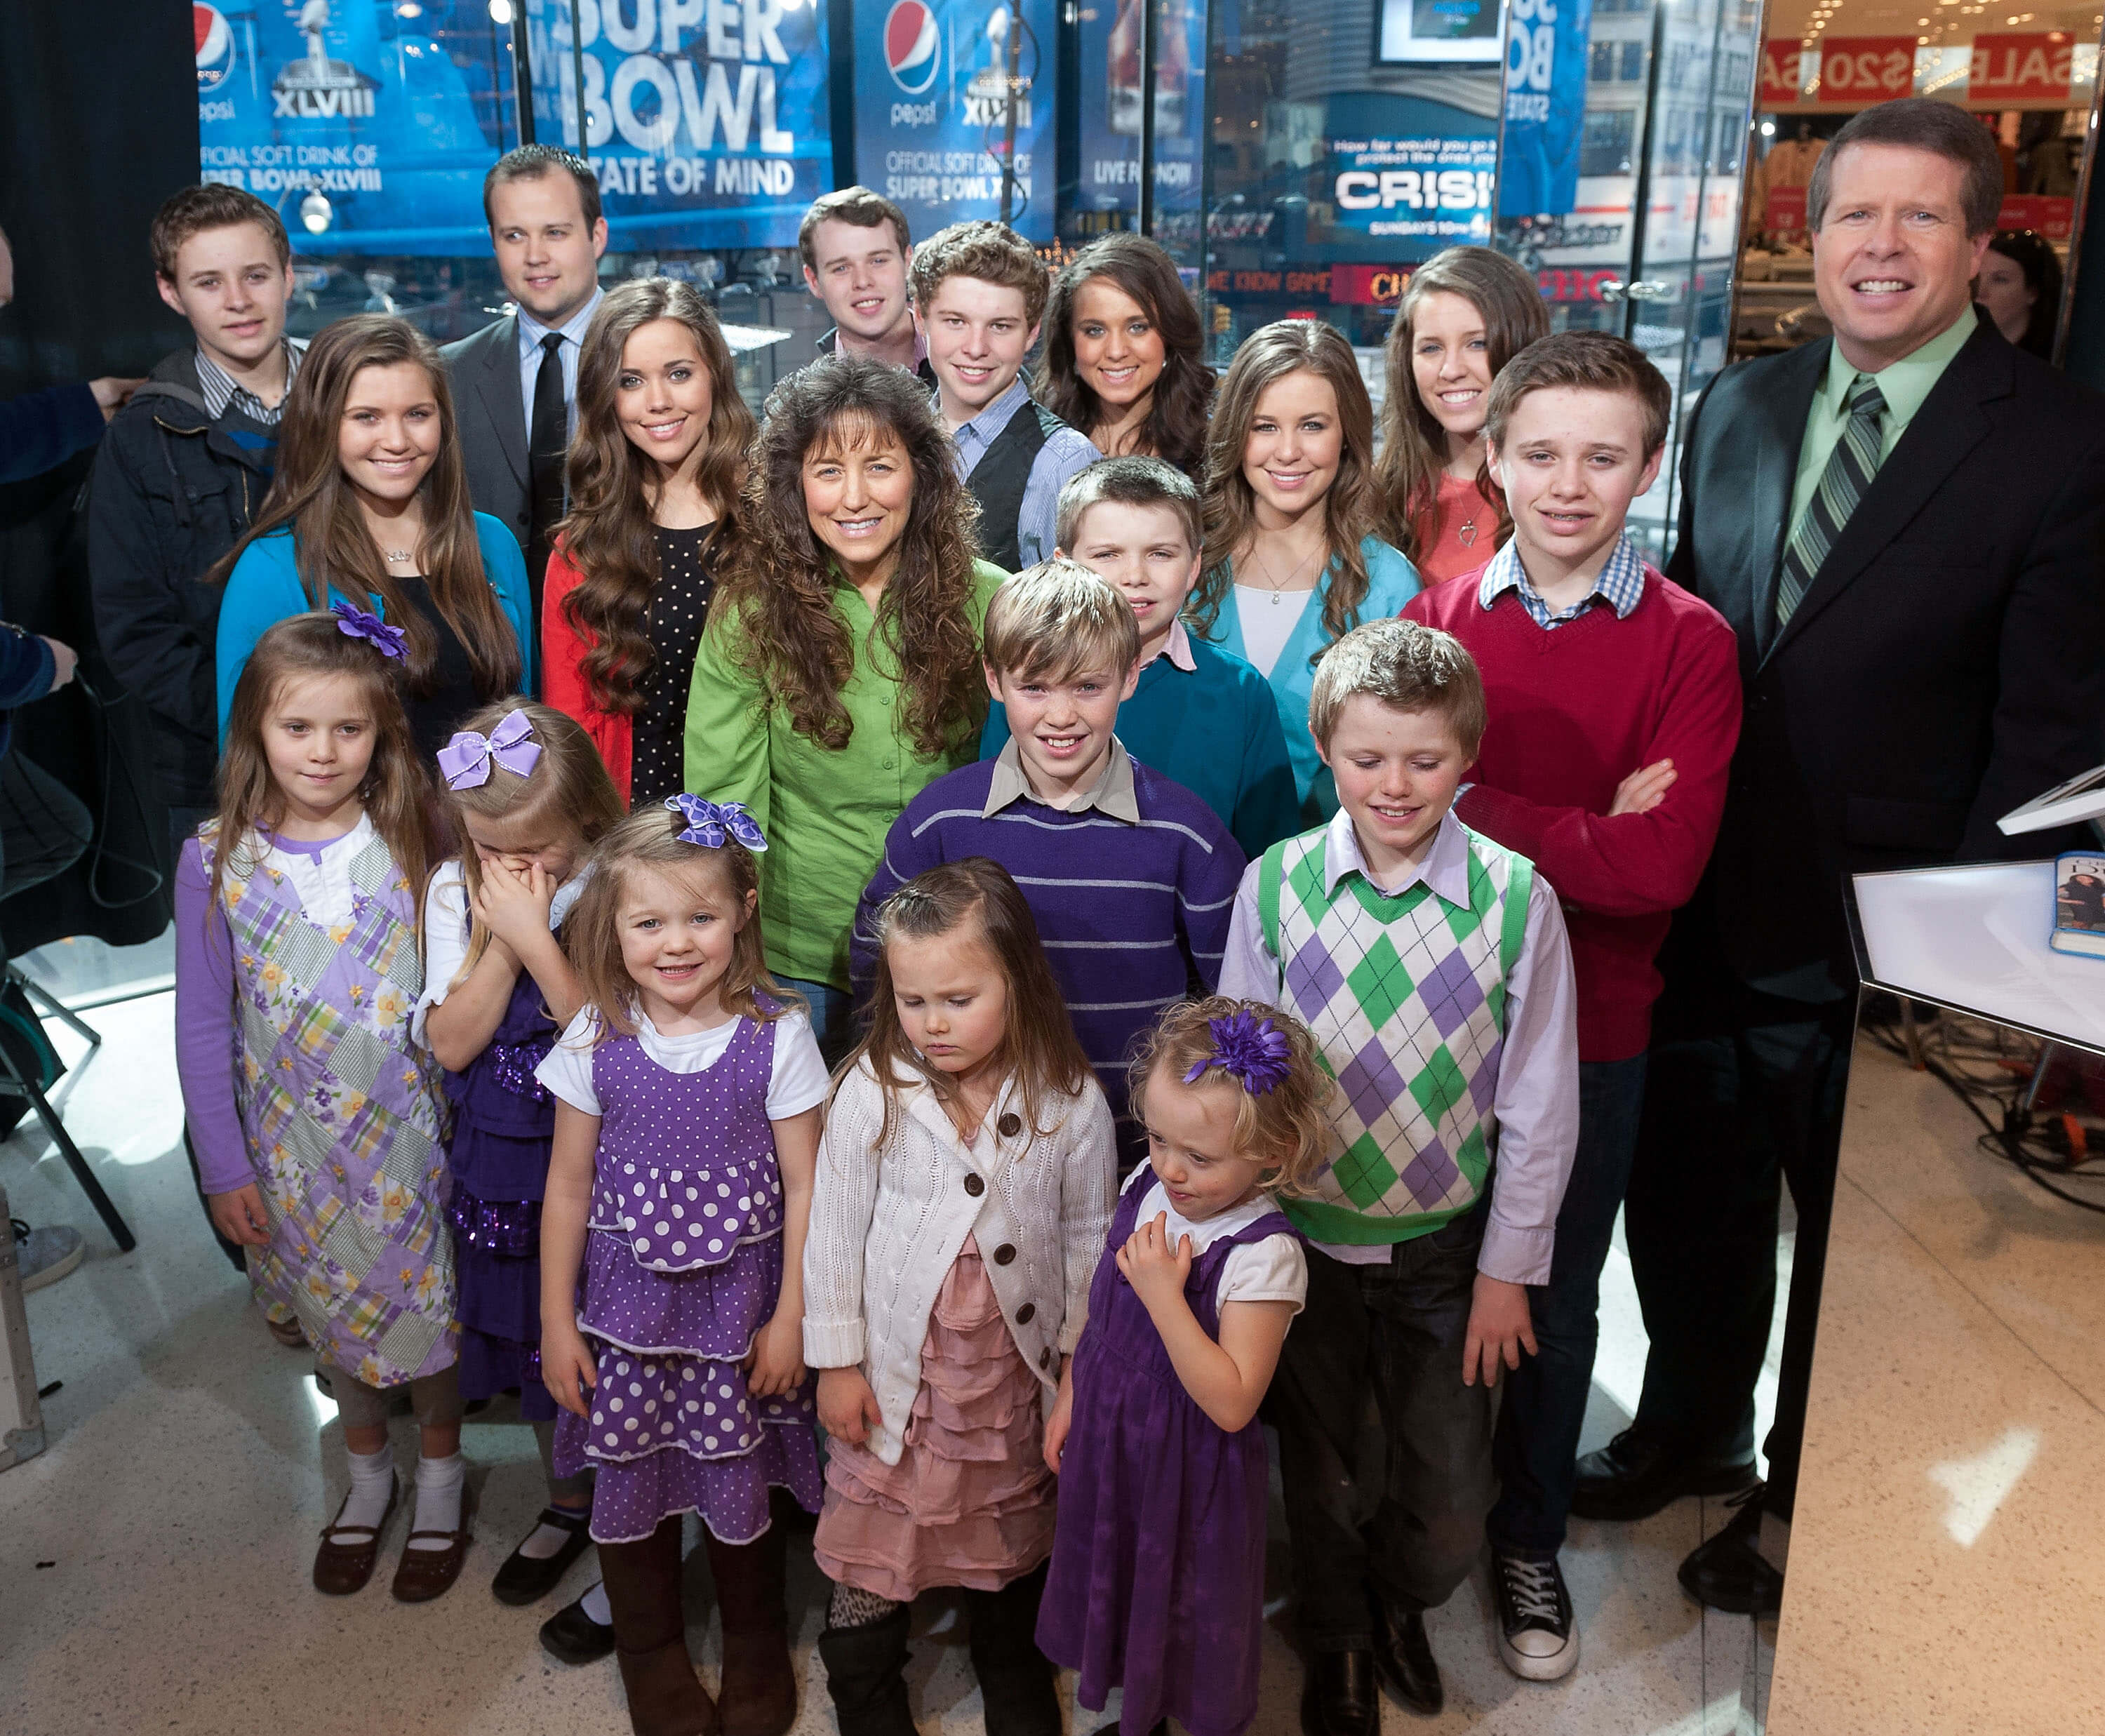 The Duggar family gathered together and smiling. The Duggars followed IBLP and Bill Gothard